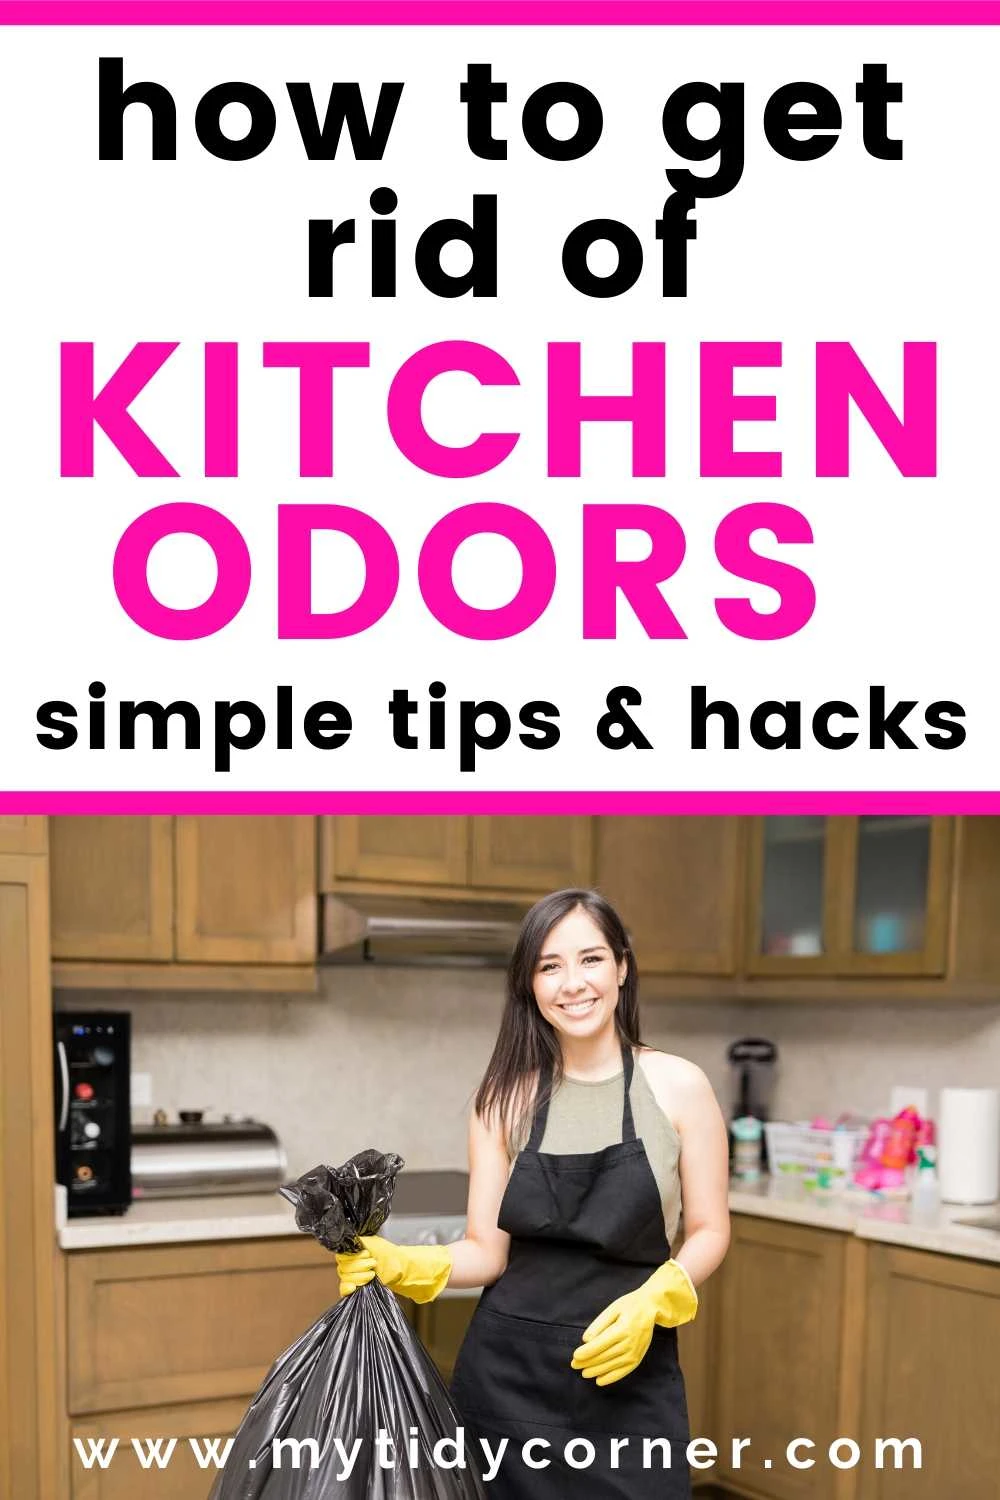 How to get rid of kitchen odors